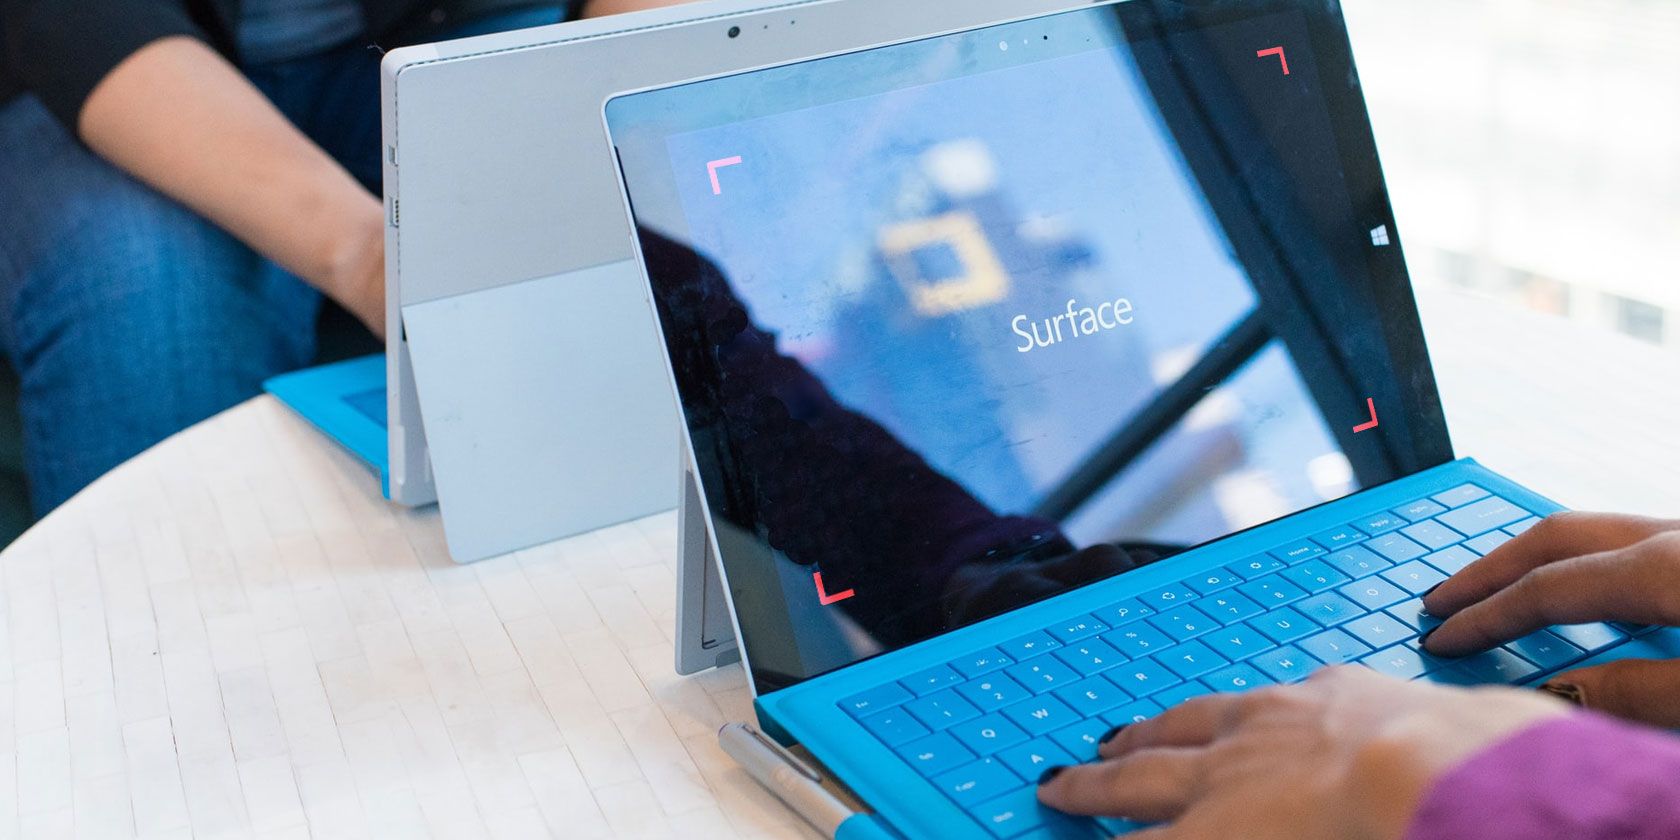 How to Take Screenshot on a Surface Tablet